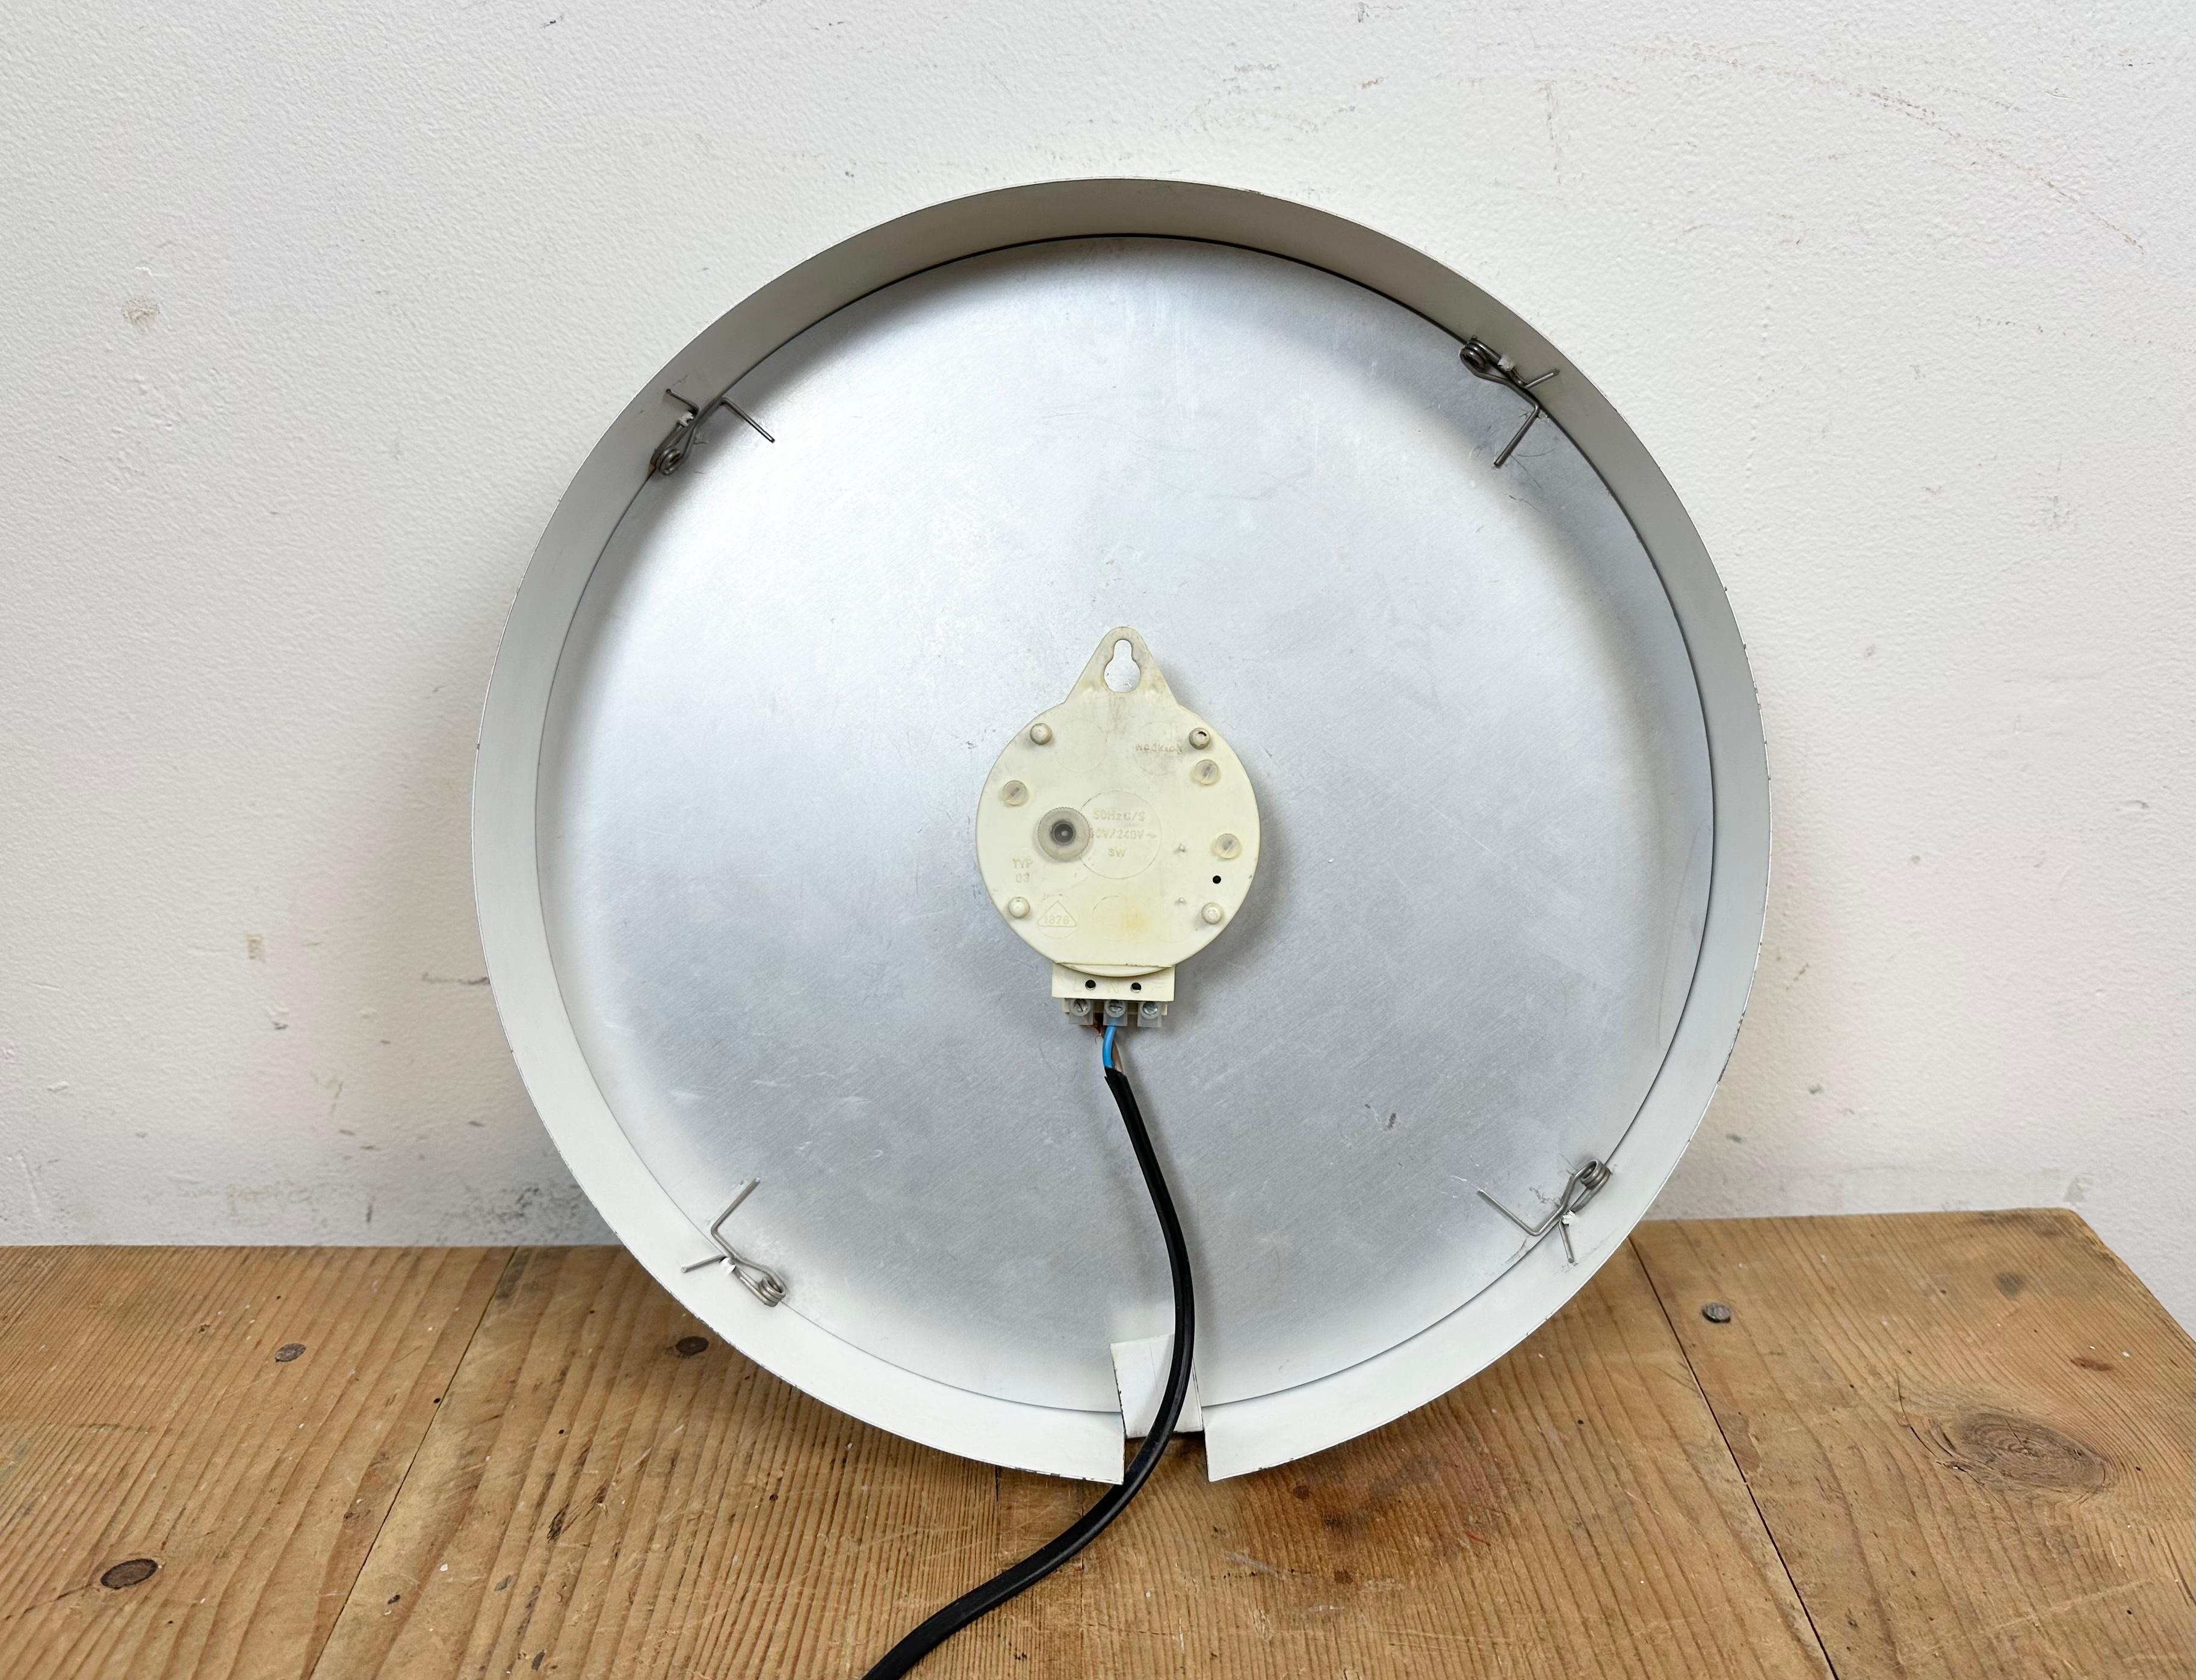 Vintage White Electric Station Wall Clock from Nedklok, 1970s For Sale 7